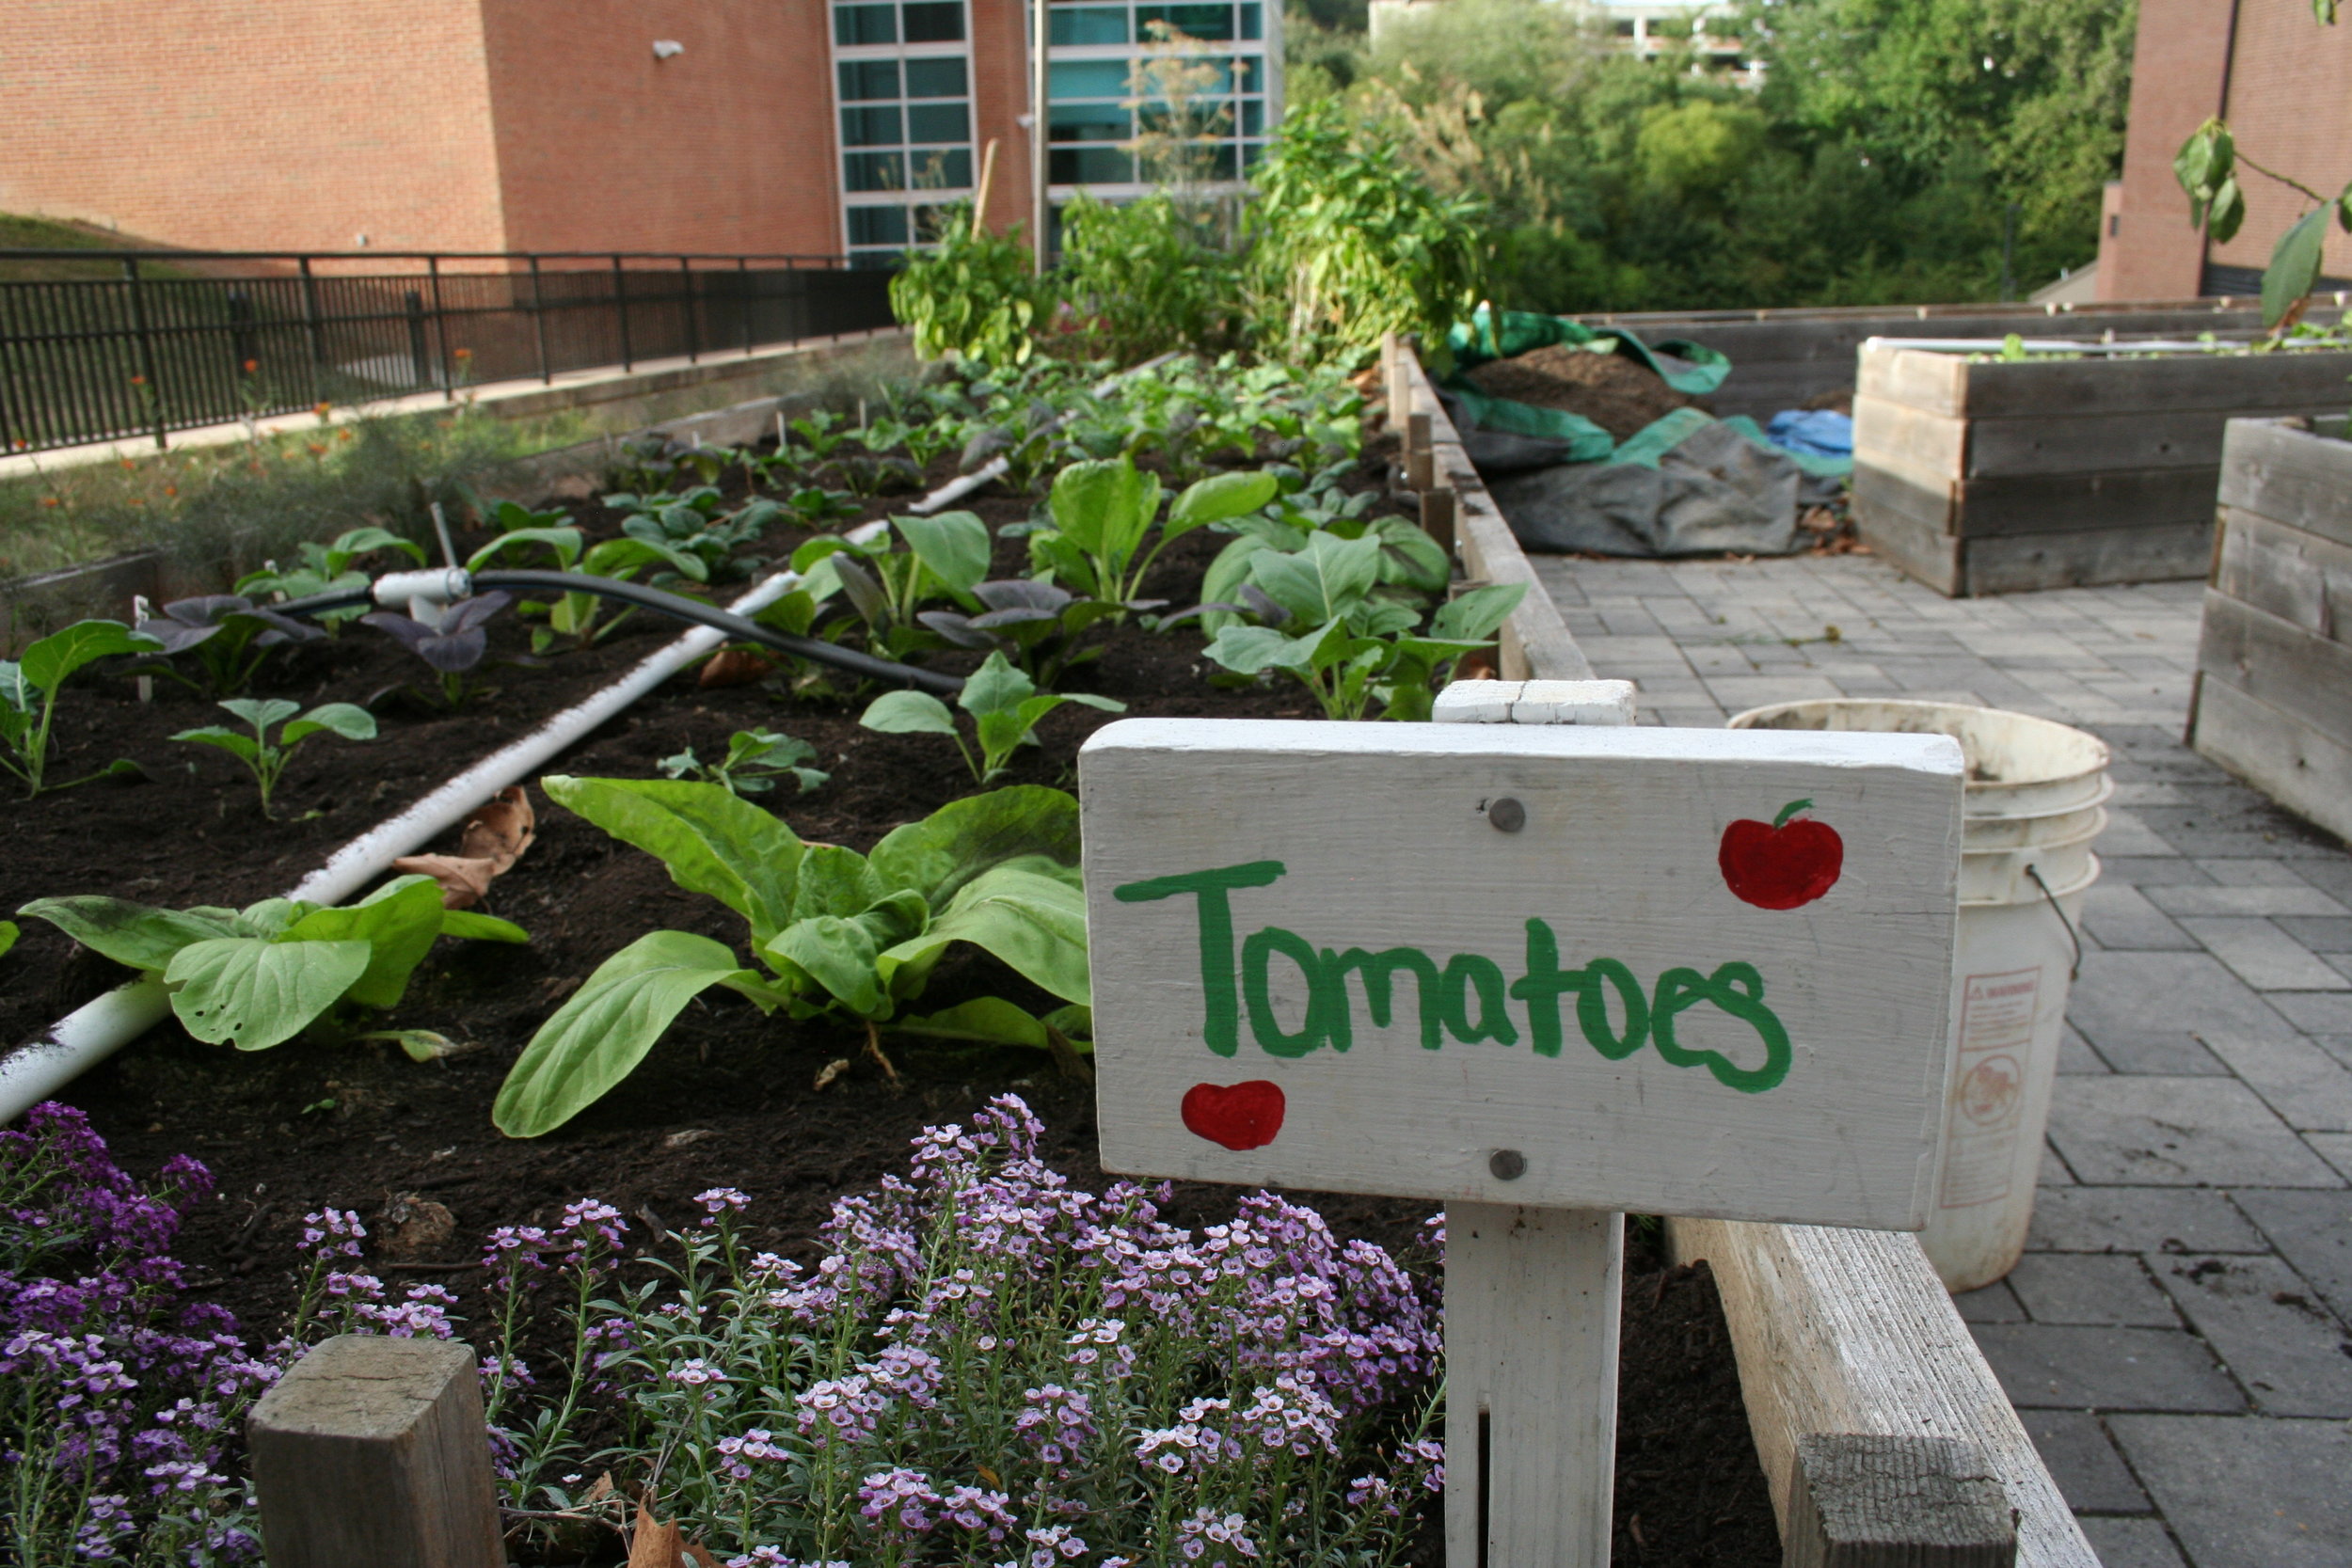  The finished tomato bed lays with fresh compost at the end of the work hour in the Public Health Garden on Sept. 28, 2015. Work hours run throughout the semester on Mondays and Thursdays from 4 p.m. to 5 p.m. Each day focuses on a new task and no ex